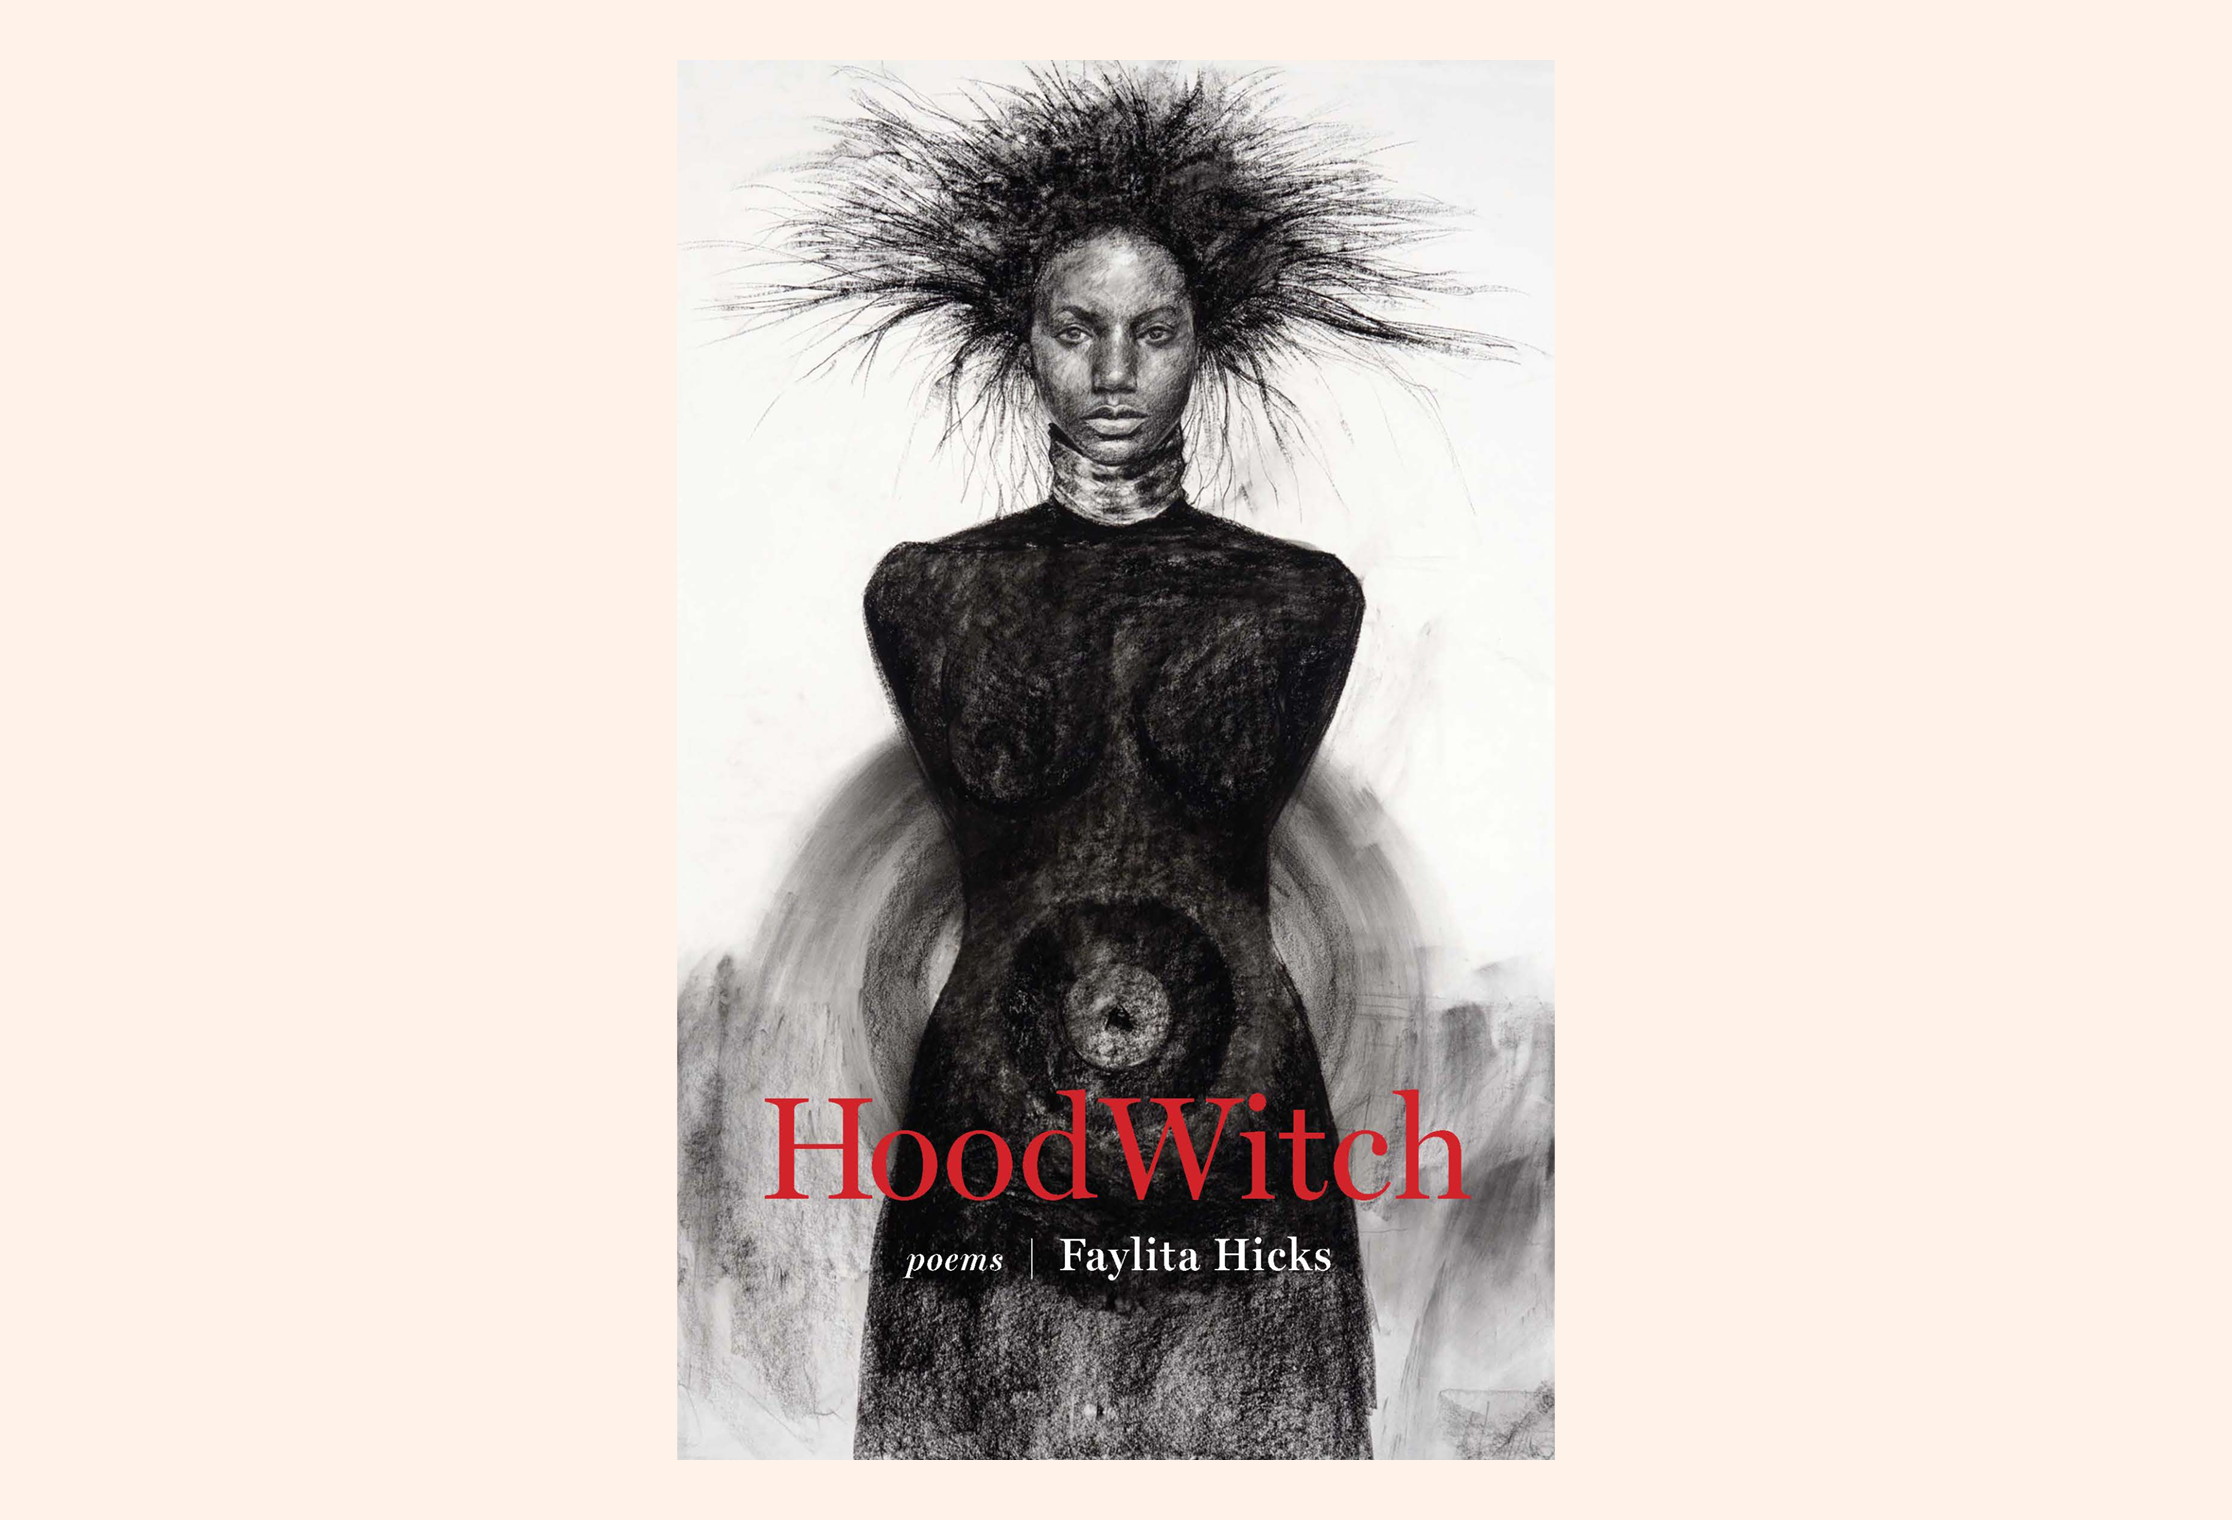 HoodWitch (Acre Books), 2019, finalist for the 2020 Lambda Literary Award for Bisexual Poetry